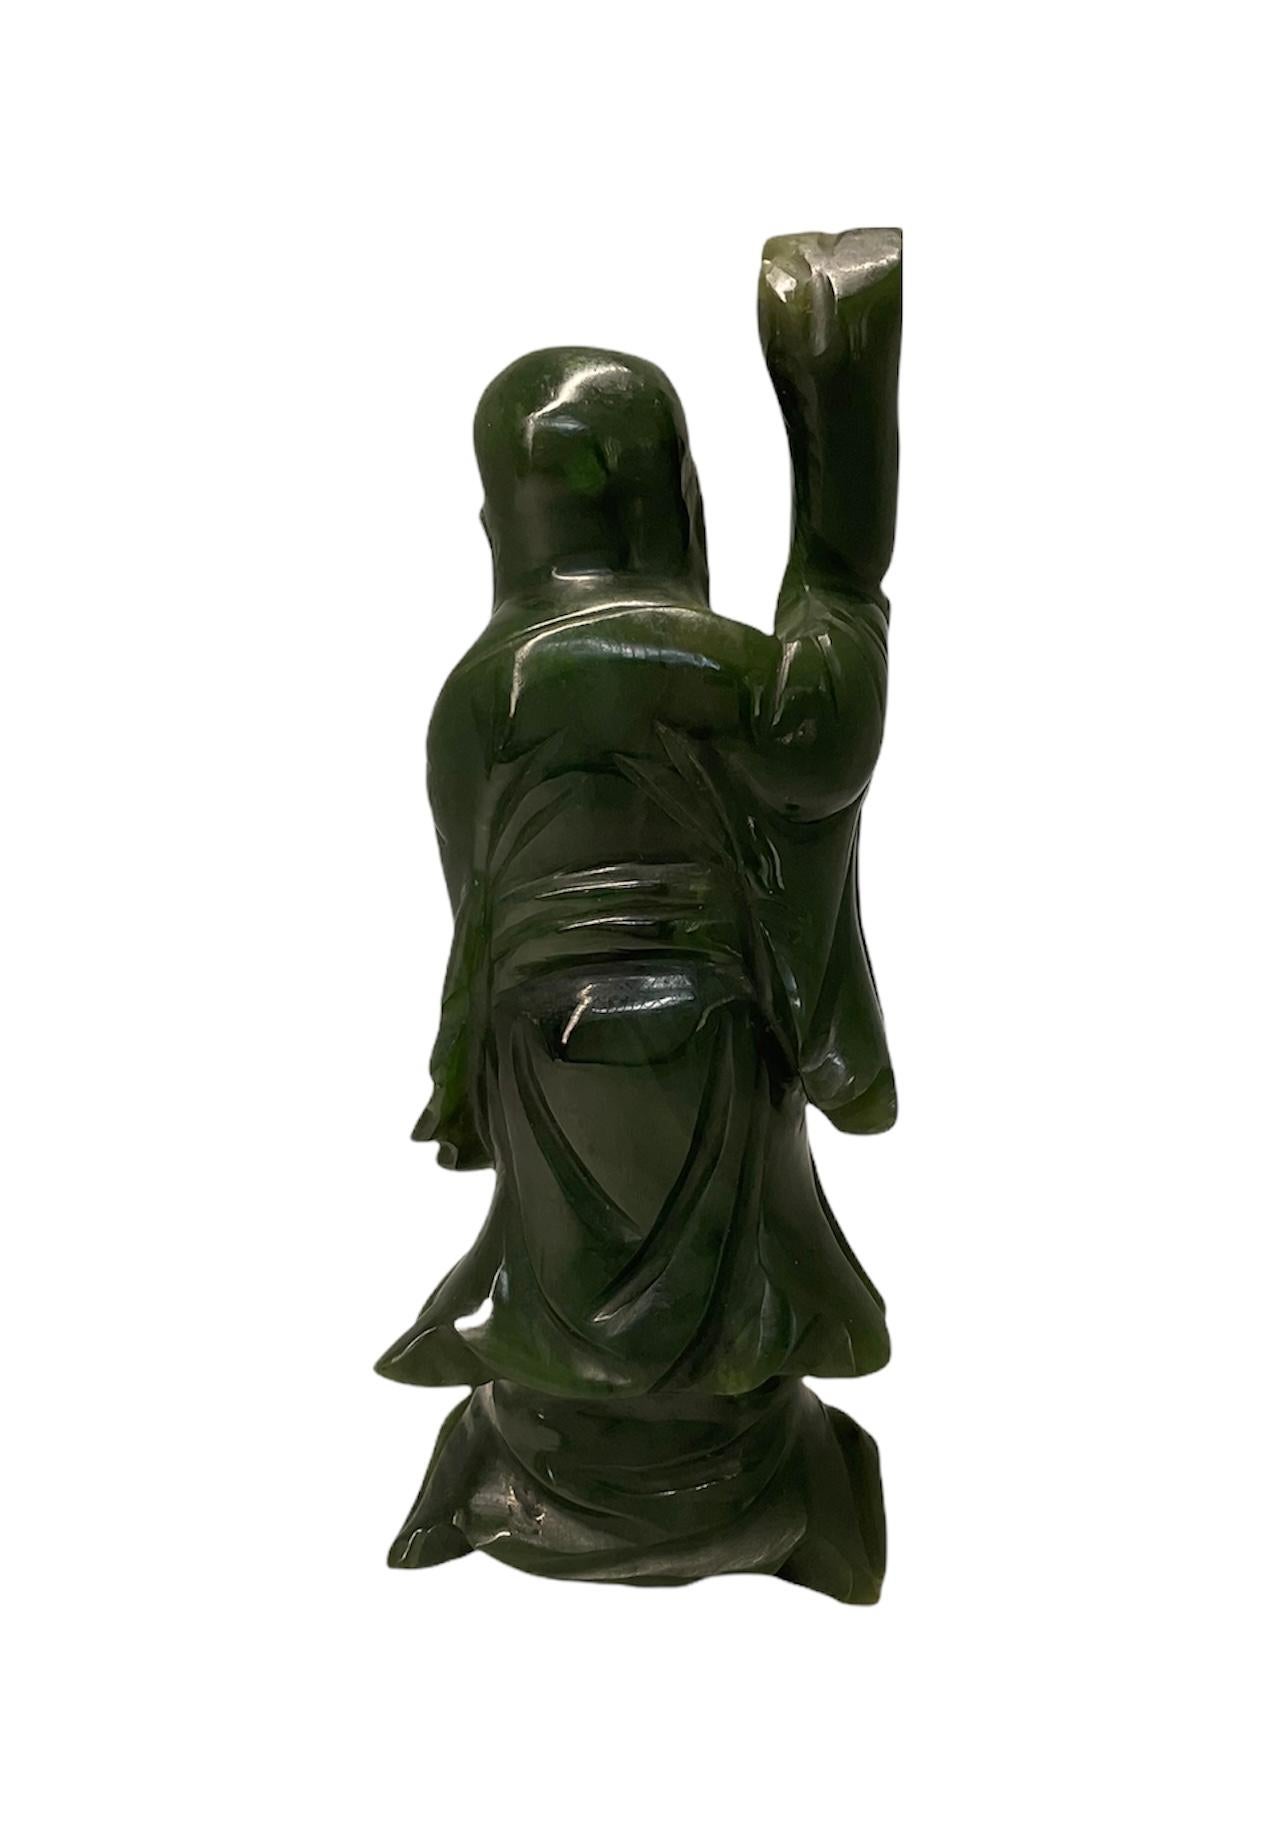 This is a hand carved green pine color jade small sculpture/figurine of Shou-Lao. It depicts an old man dressed with along robe. He has a very long beard and prominent bald head. He is holding a wood stick in his right hand and is holding a gourd